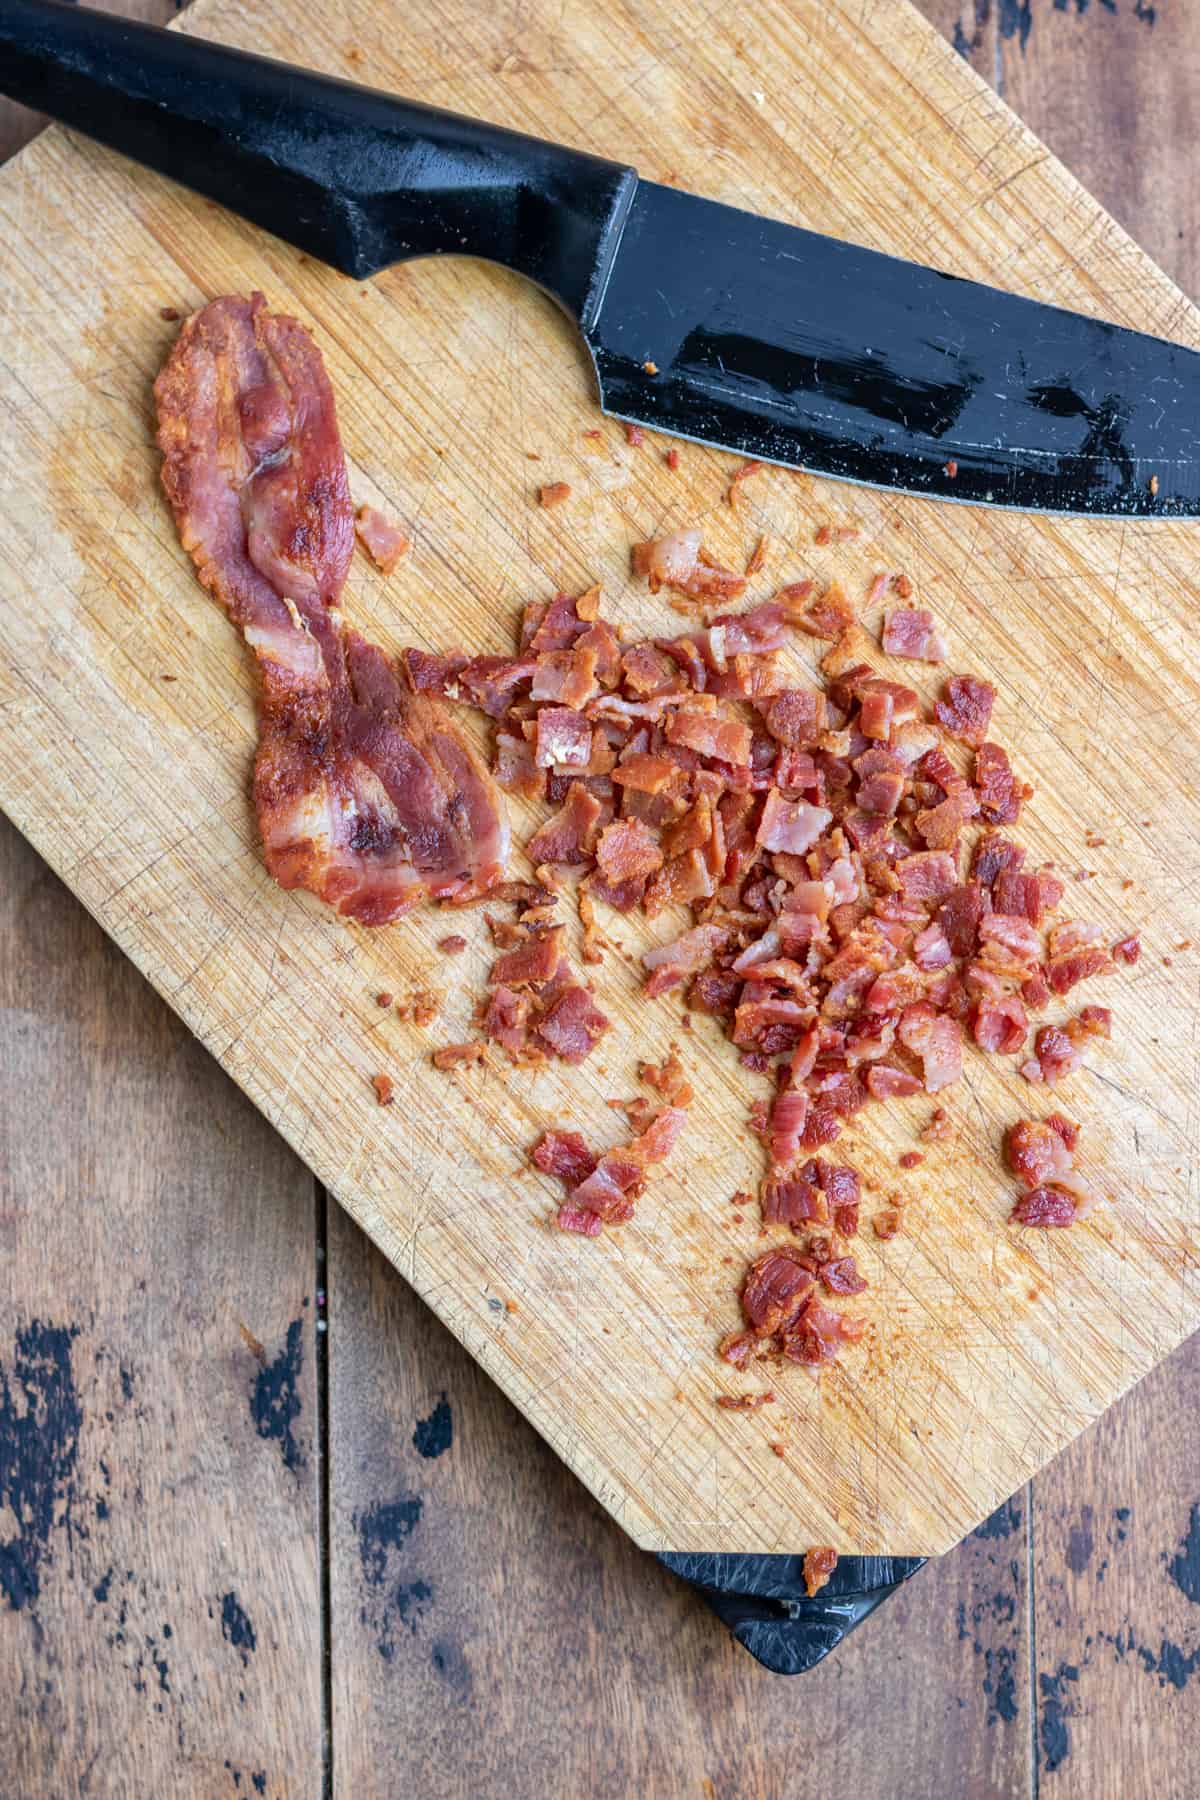 Bacon being chopped on a cutting board.